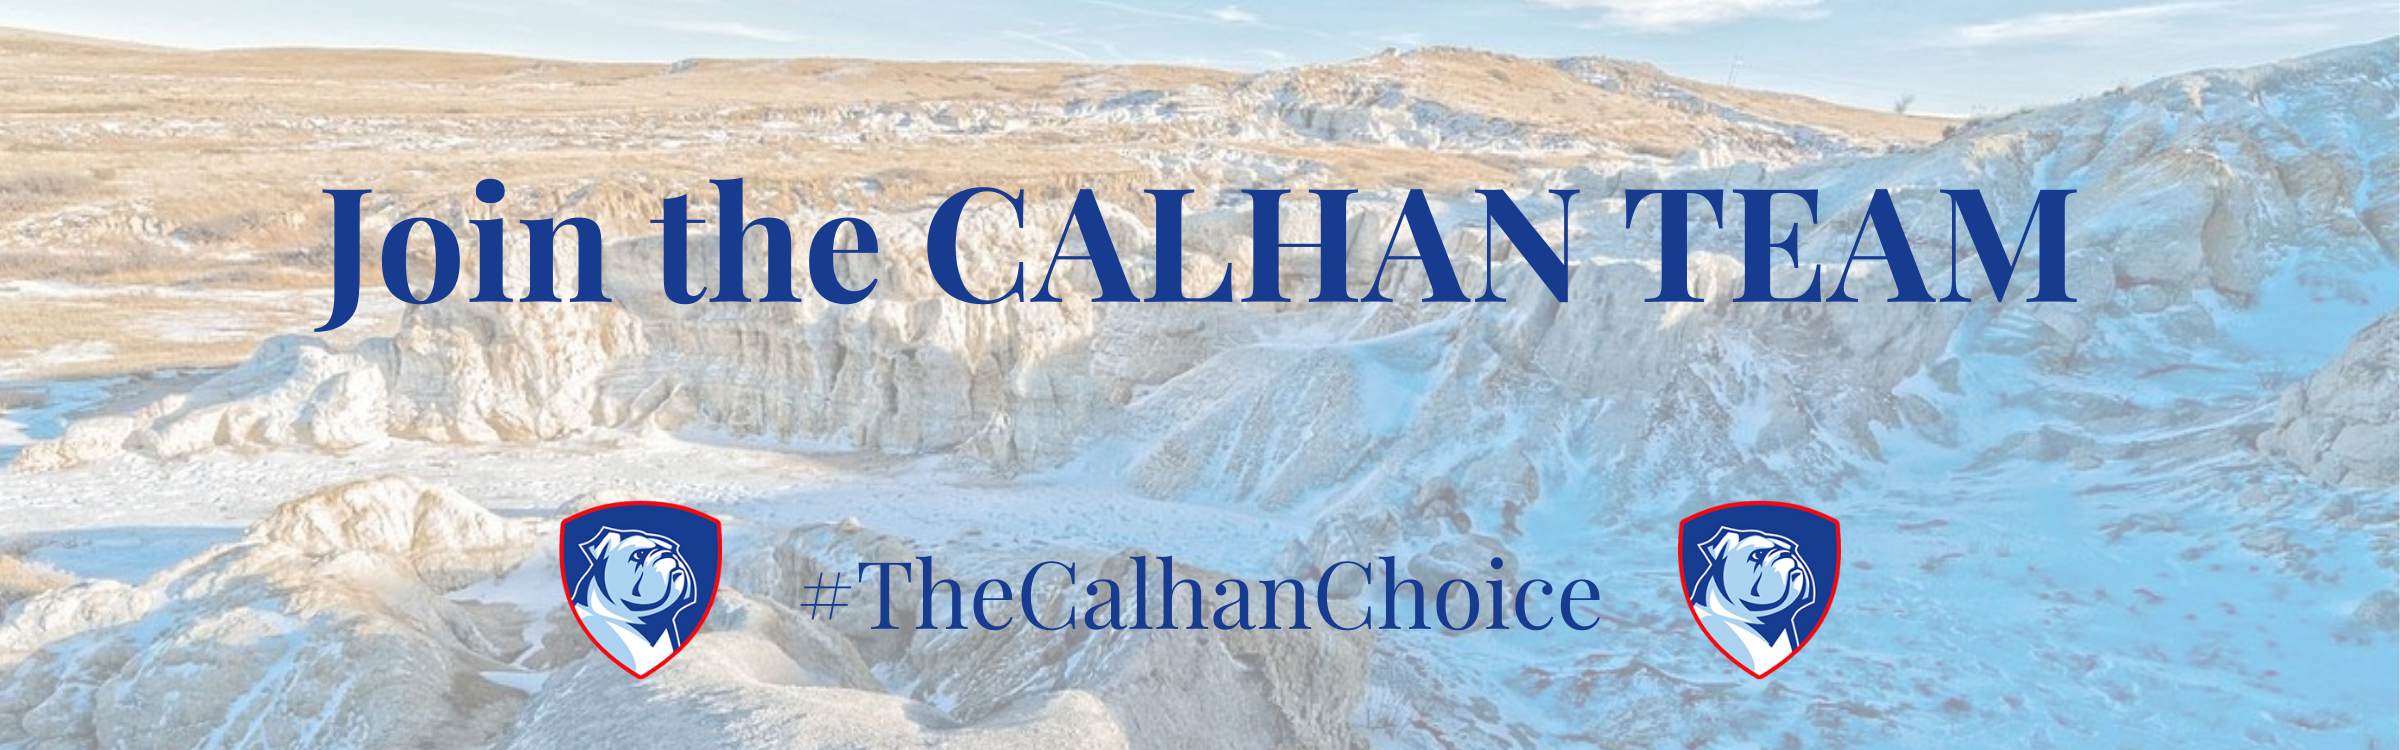 Join the Calhan Team #TheCalhanChoice